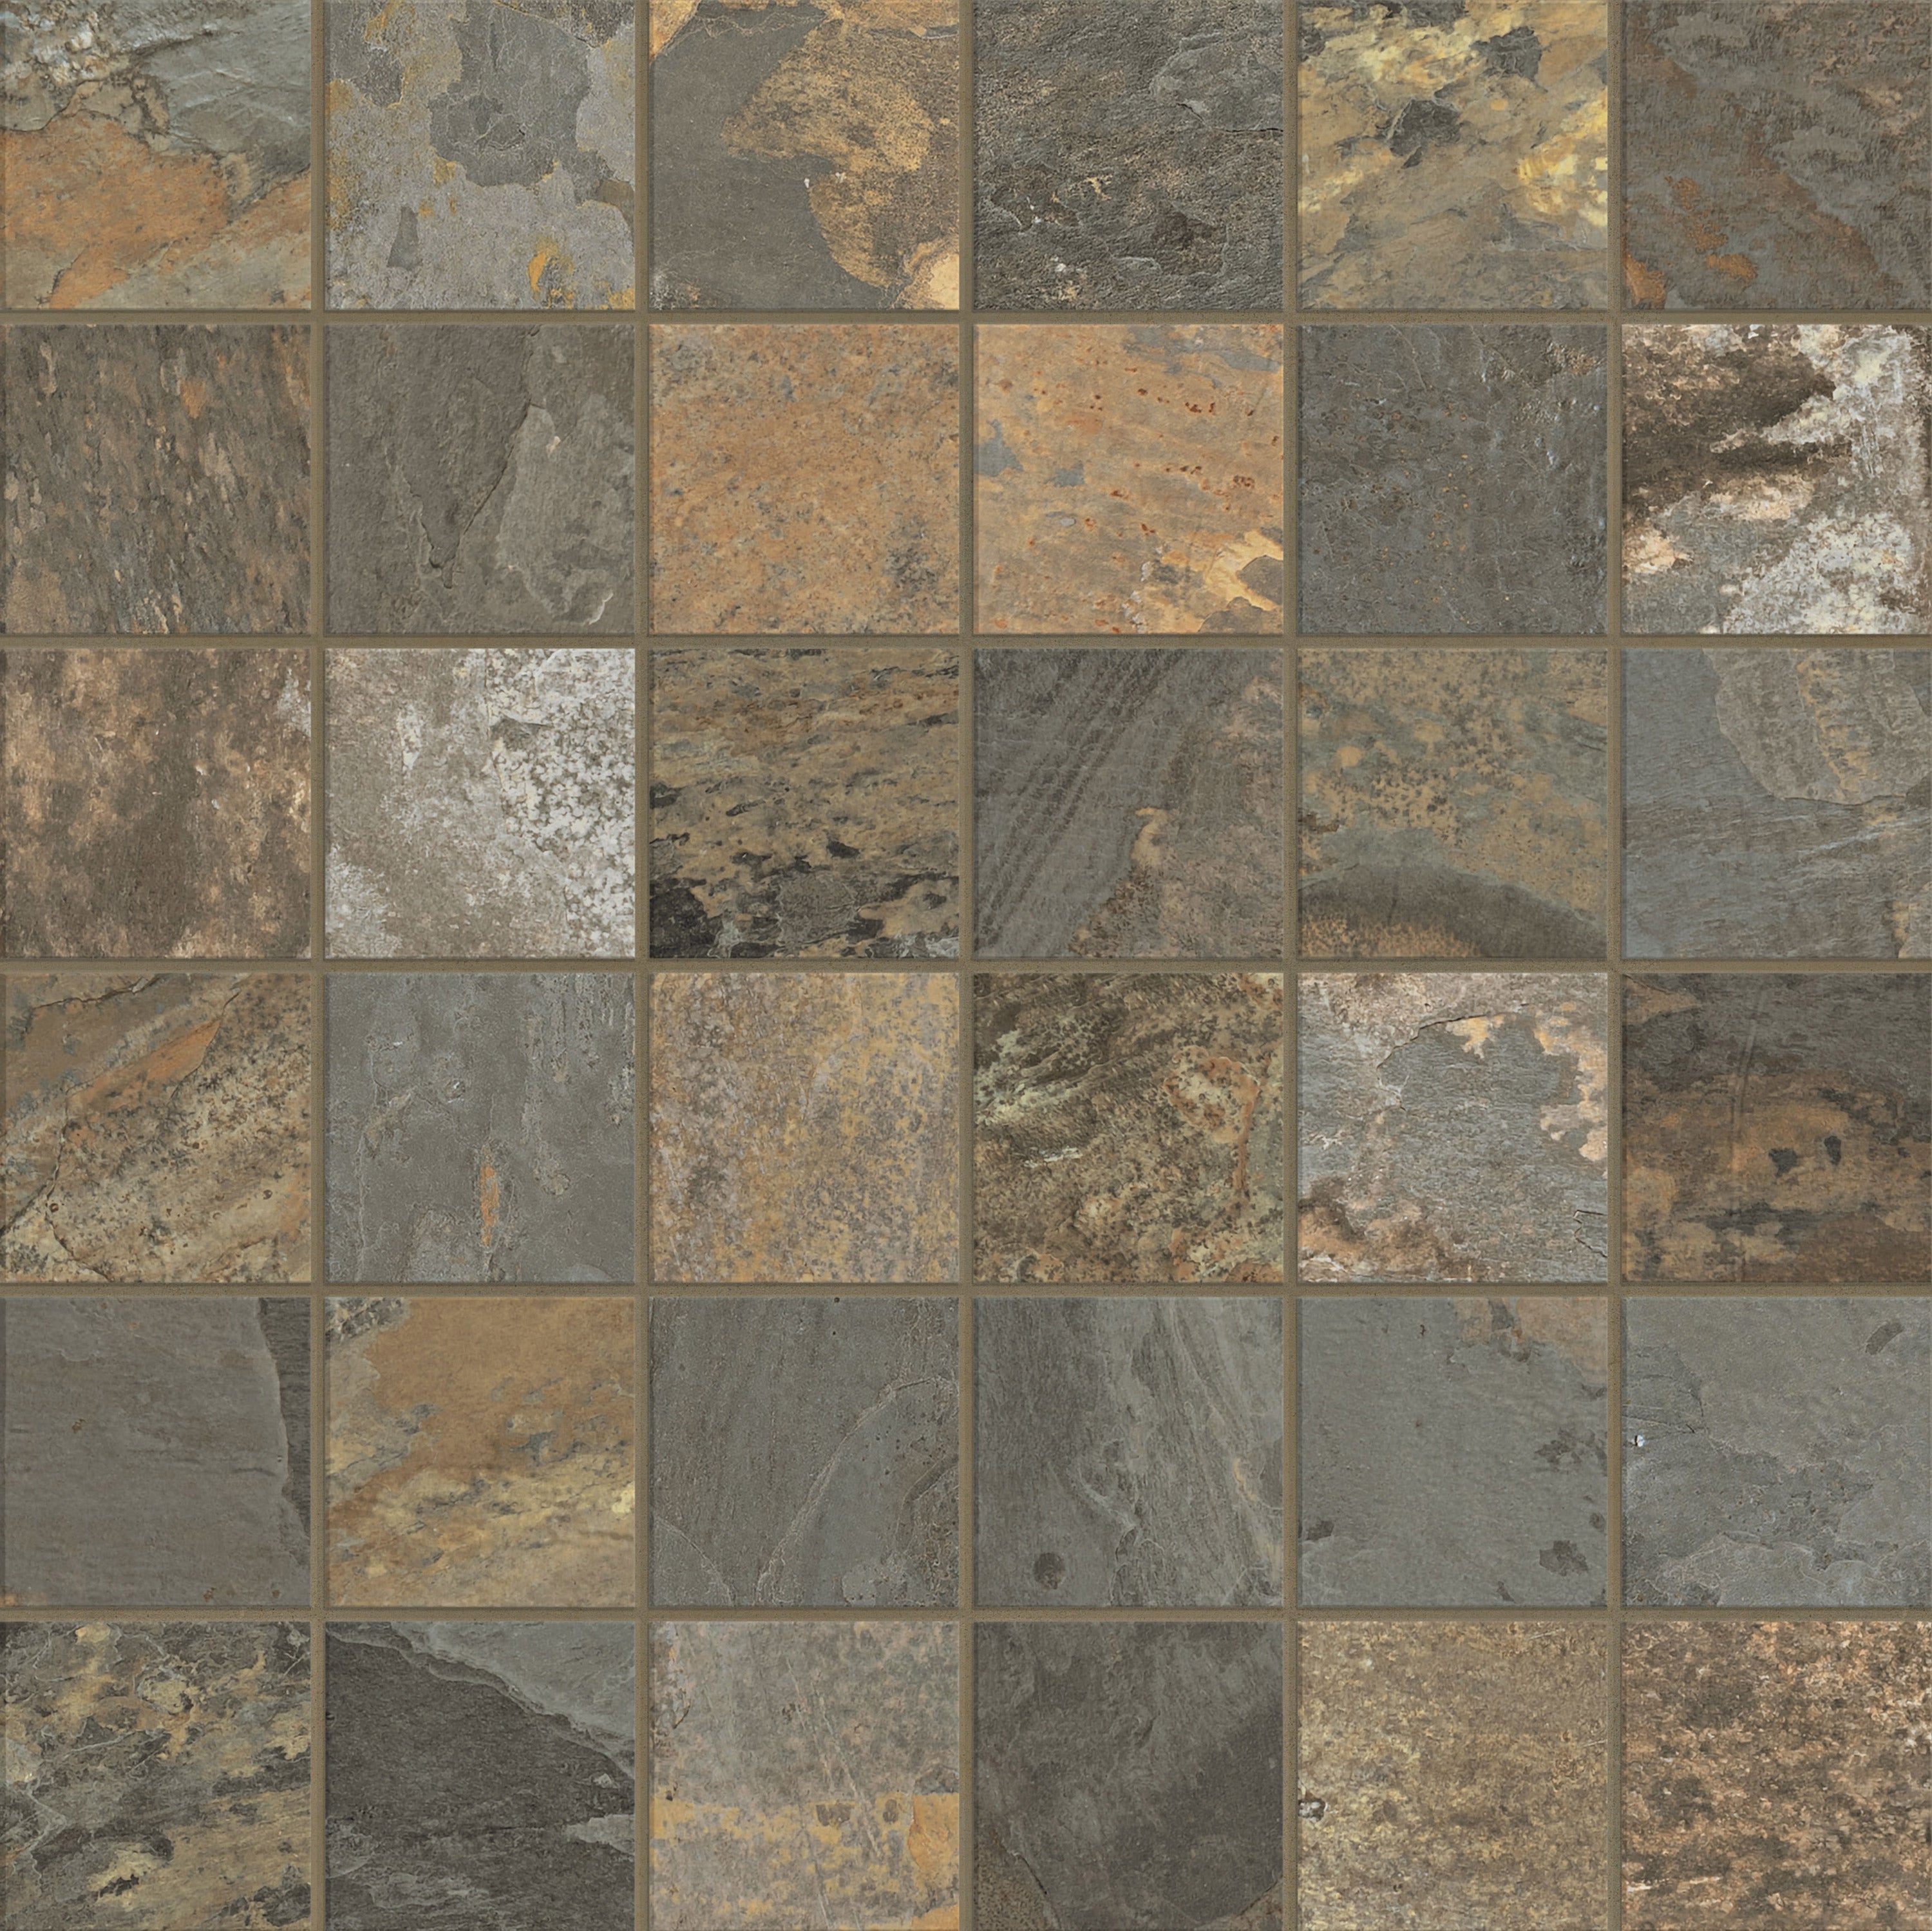 landmark 9mm essence california gold straight stack 2x2 mosaic 12x12x9mm matte rectified porcelain tile distributed by surface group international